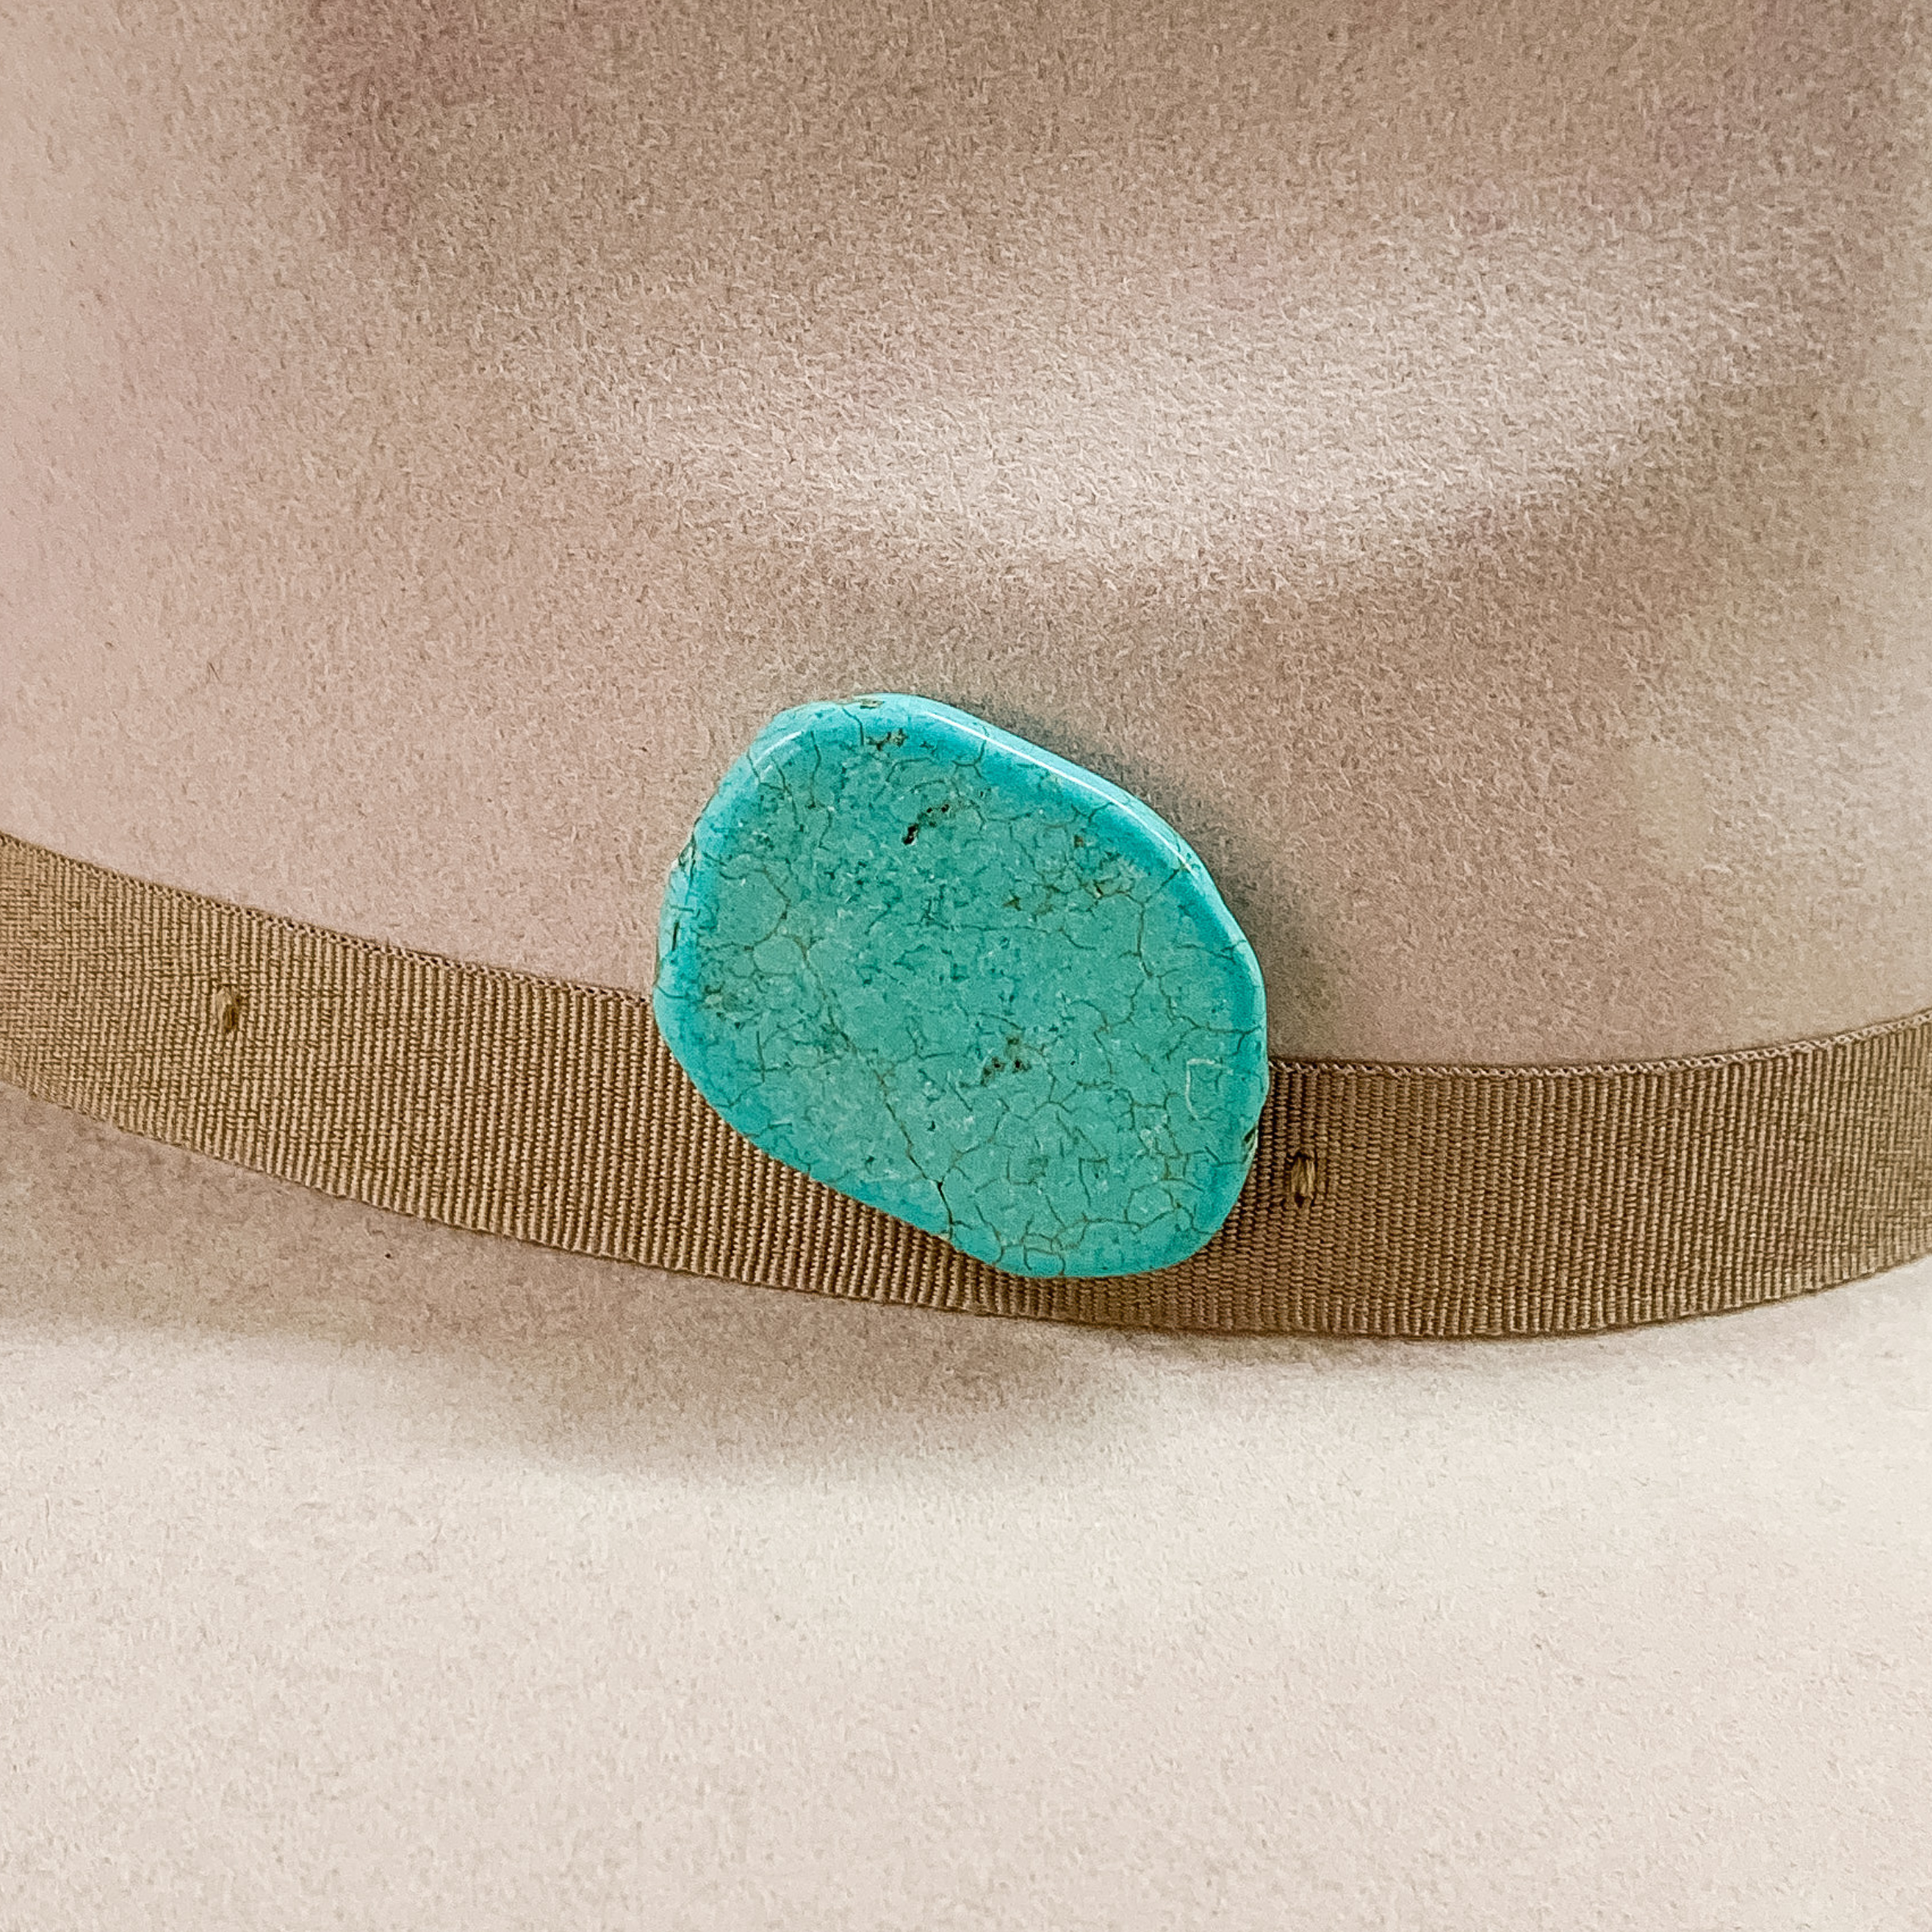 Turquoise stone with an irregular shape hat pin pictured on a beige colored hat. 